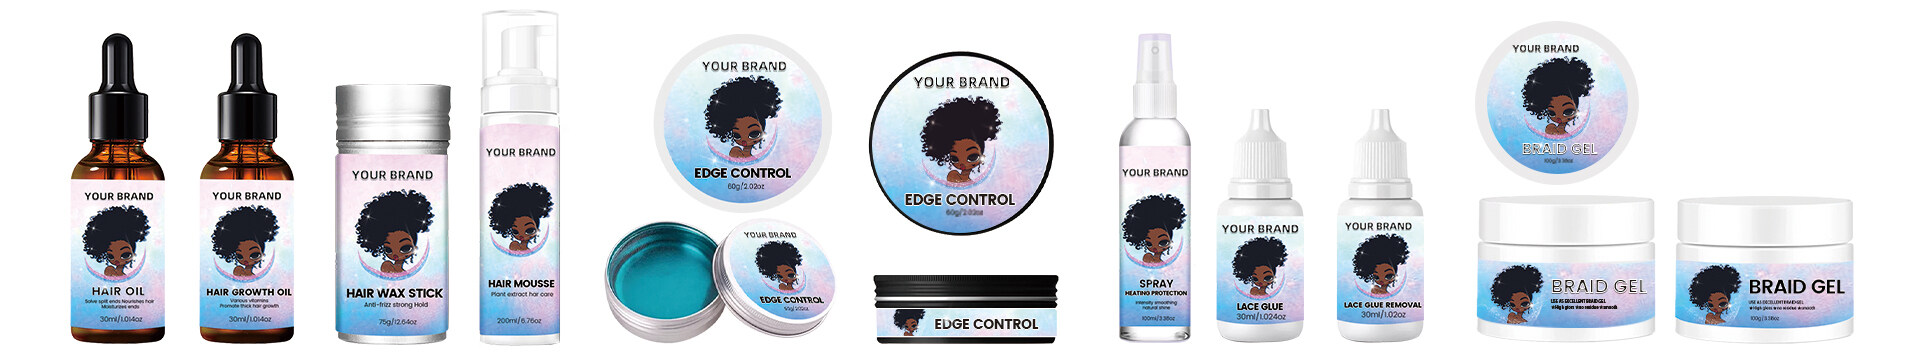 YOUR LOGO Edge Fixer Hair Shine Gel 24 Hour Max Hold Non-Flaking Biotin B7 Infused Natural Styling Perfect for Braiding,YOUR LOGO Braid & Edge Control Gel Quick Drying Non Greasy Extreme Hold Long Lasting for Braids Locks Twists Cornrows,YOUR LOGO Lace Melting Spray for Wigs Extreme Firm Hold-Long Lasting Formula with Fast Drying,YOUR LOGO Braid Gel Extreme Hold Smooths and Tames Frizz No Flaking or Drying High Shine Long Lasting for Braids Locks,YOUR LOGO Wigs Hair Dye Pen For Root Instant Hairline Concealer Pen Hair Dye Brush Pens